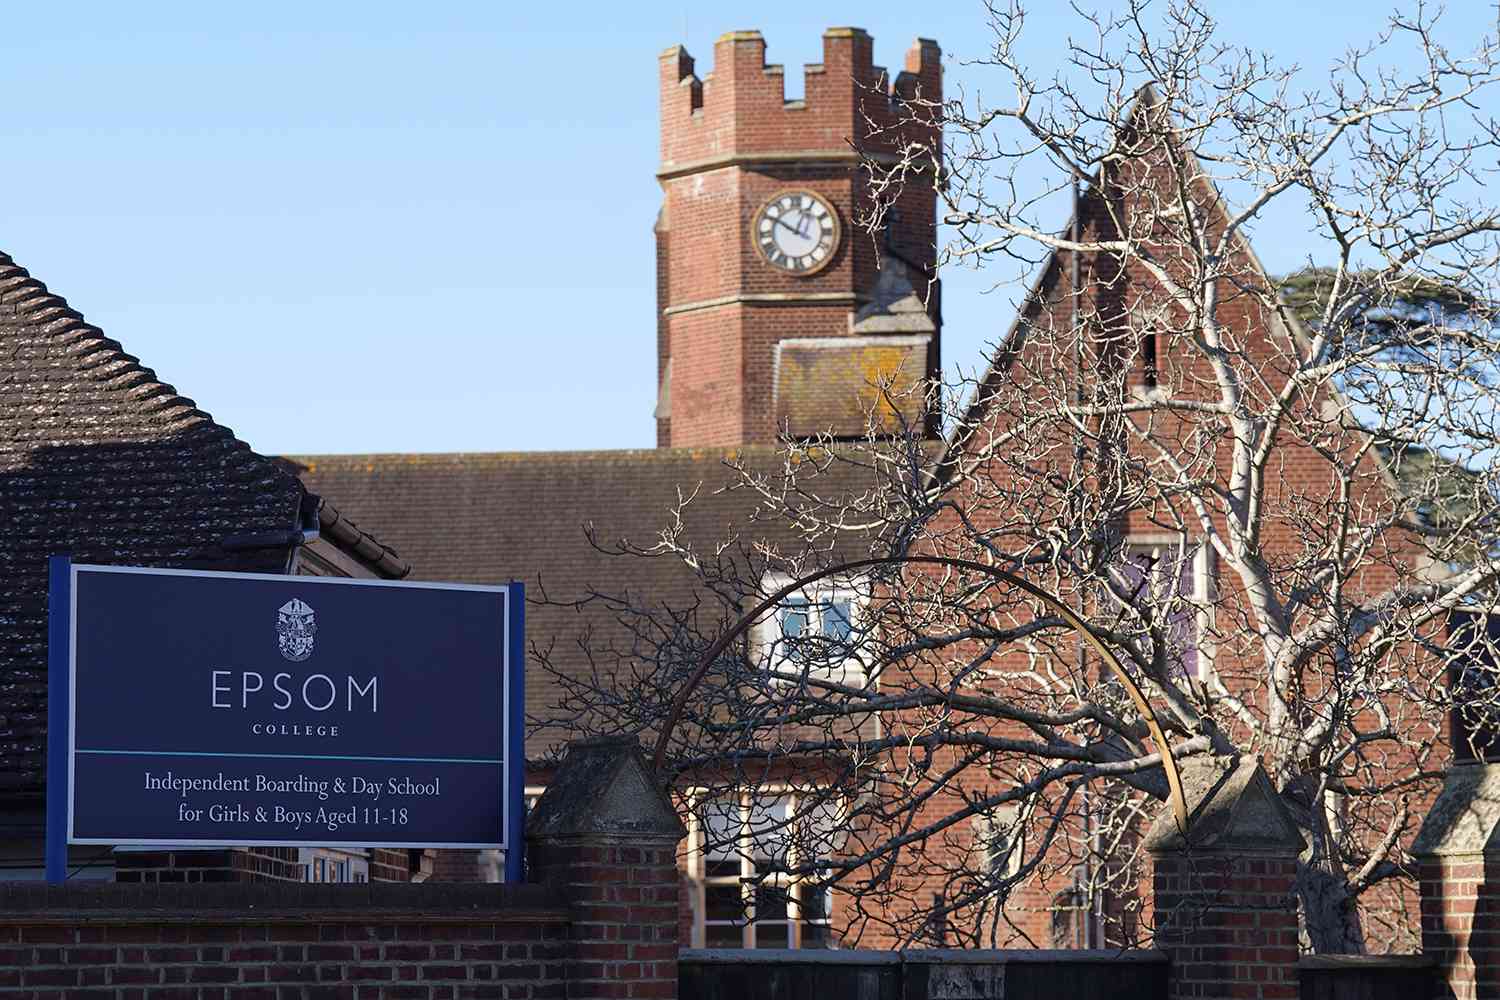 Epsom College in Surrey where the bodies of headmistress Emma Pattison, 45, her daughter Lettie, seven, and her husband George, 39, were found when officers were called to the private school by the South East Coast Ambulance Service